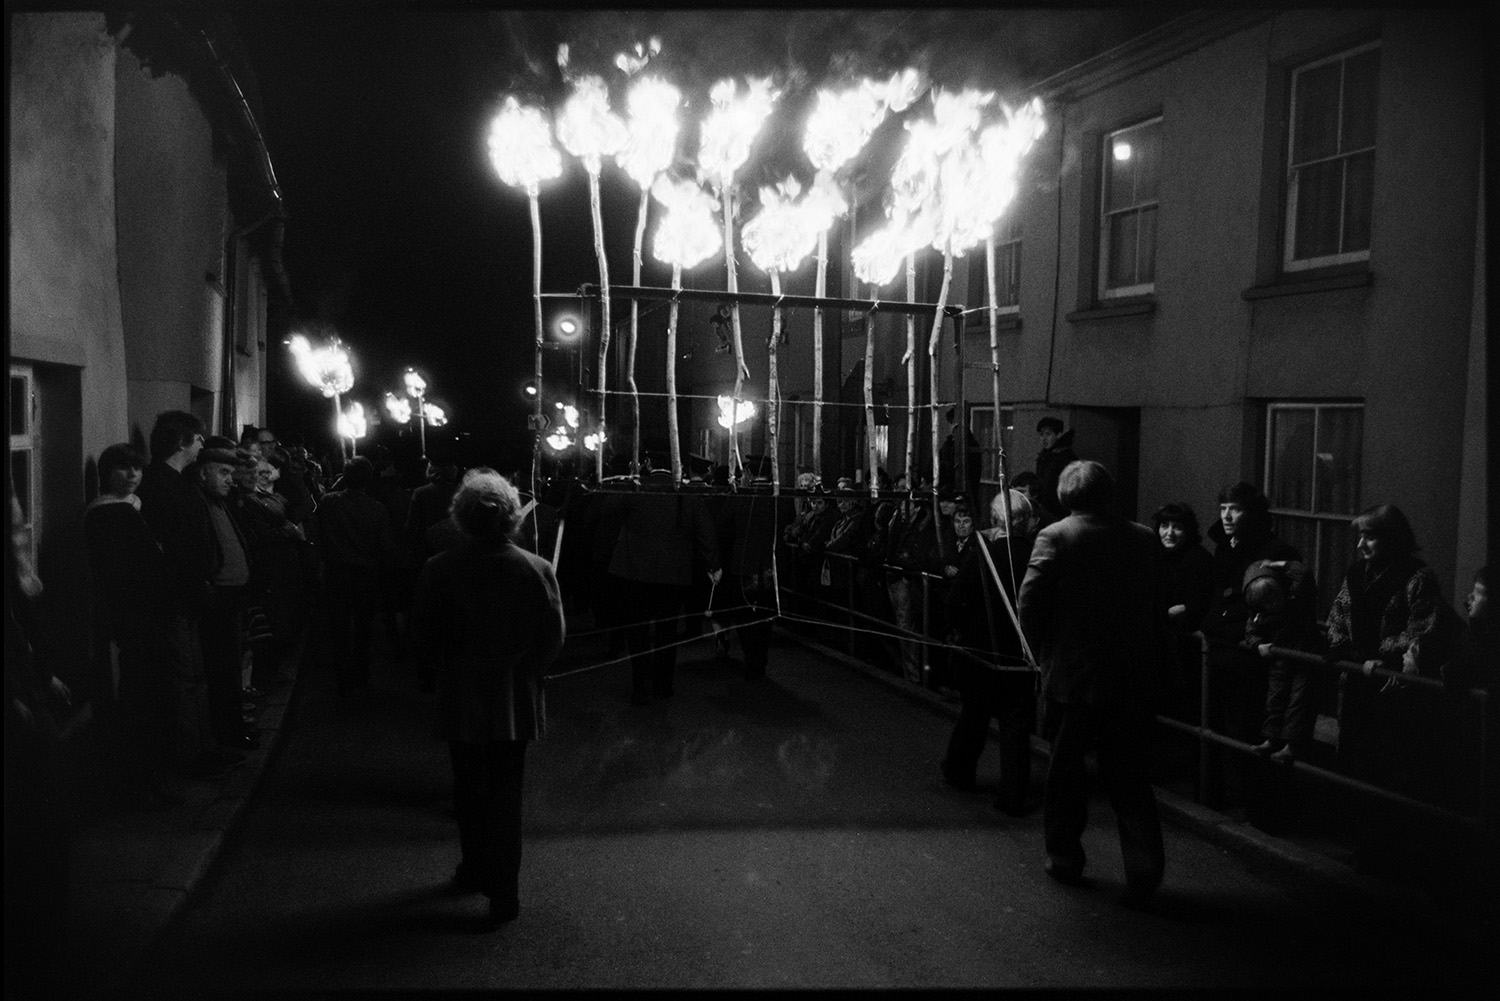 Flares and floats at night. <br /> [Men carrying a wooden frame with flaming torches through a street at Hatherleigh Carnival at night. People are lining the street, watching the parade.]